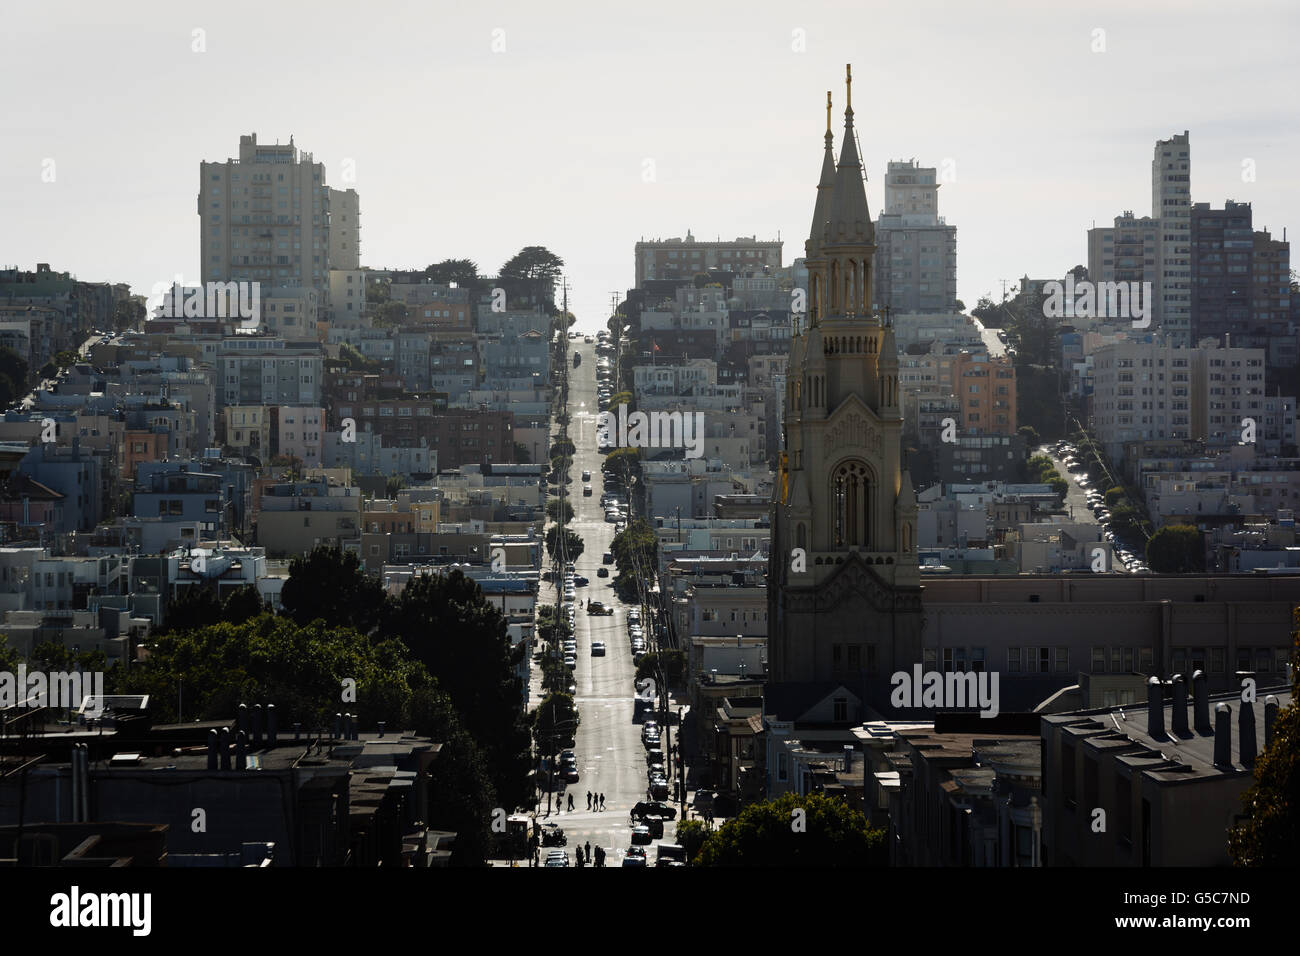 View of Saints Peter and Paul Church and Filbert Street in San Francisco, California. Stock Photo